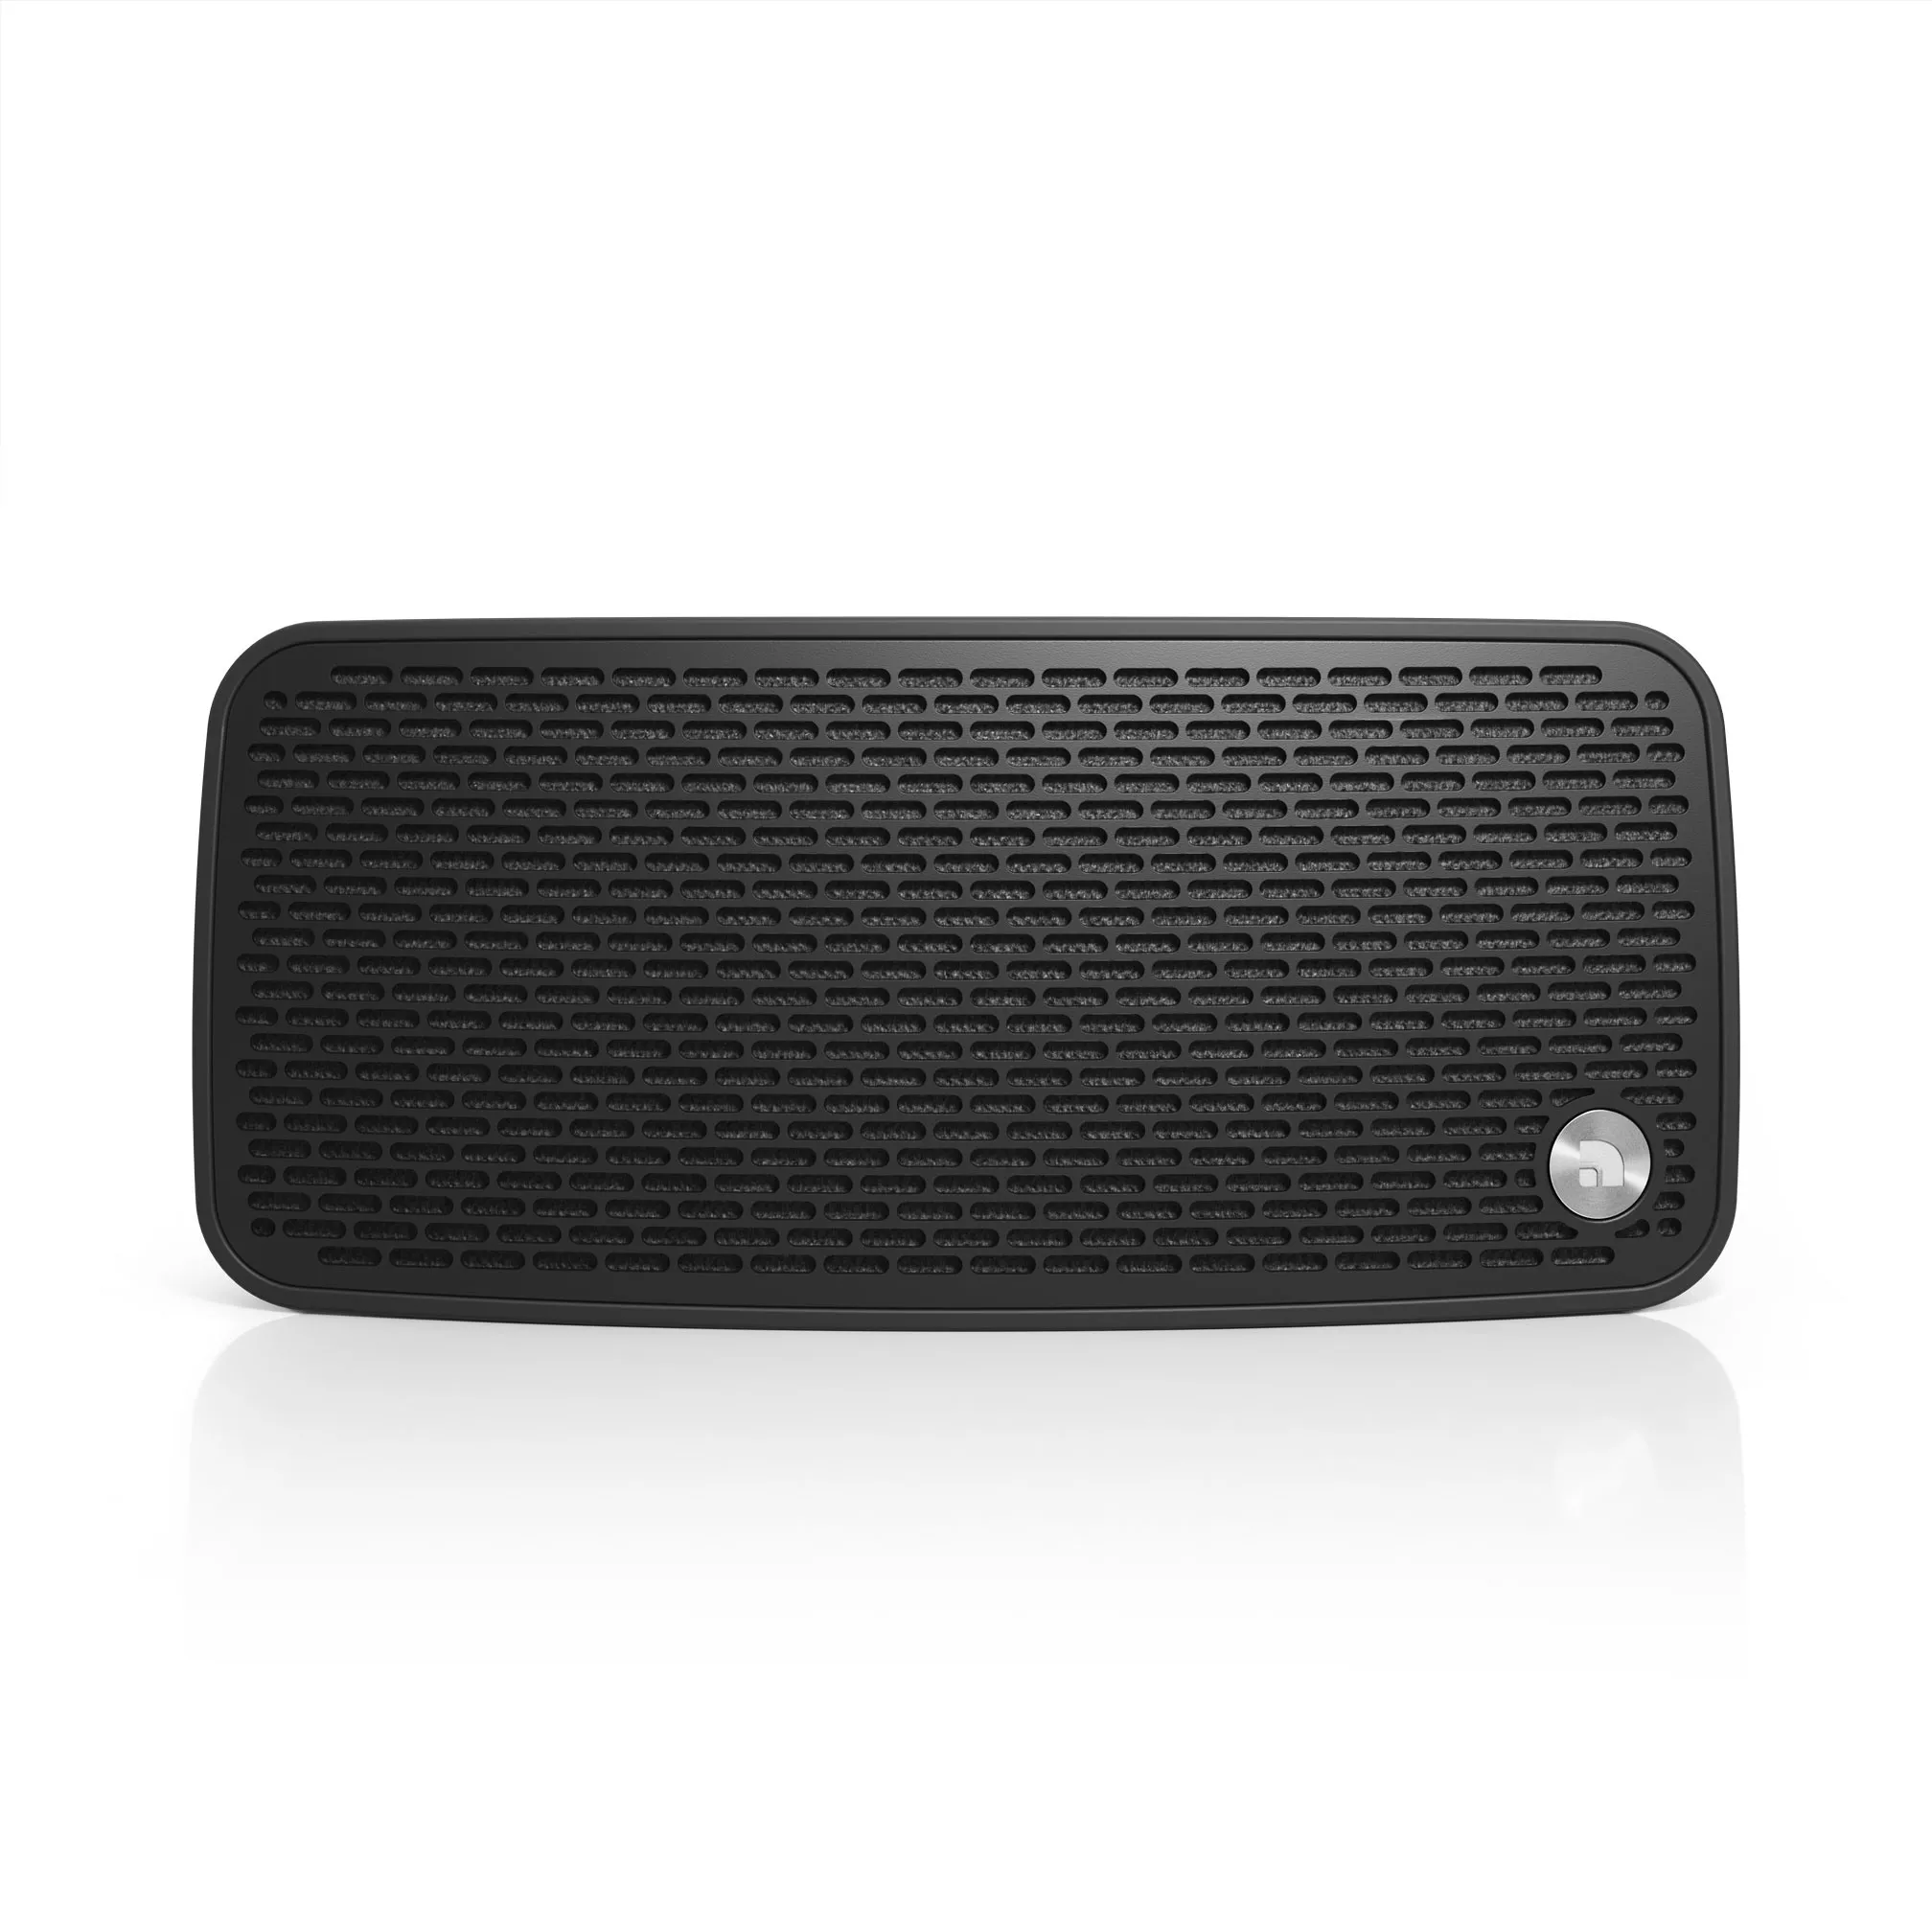 AUDIO PRO P5: the portable speaker that surrounds you with sound